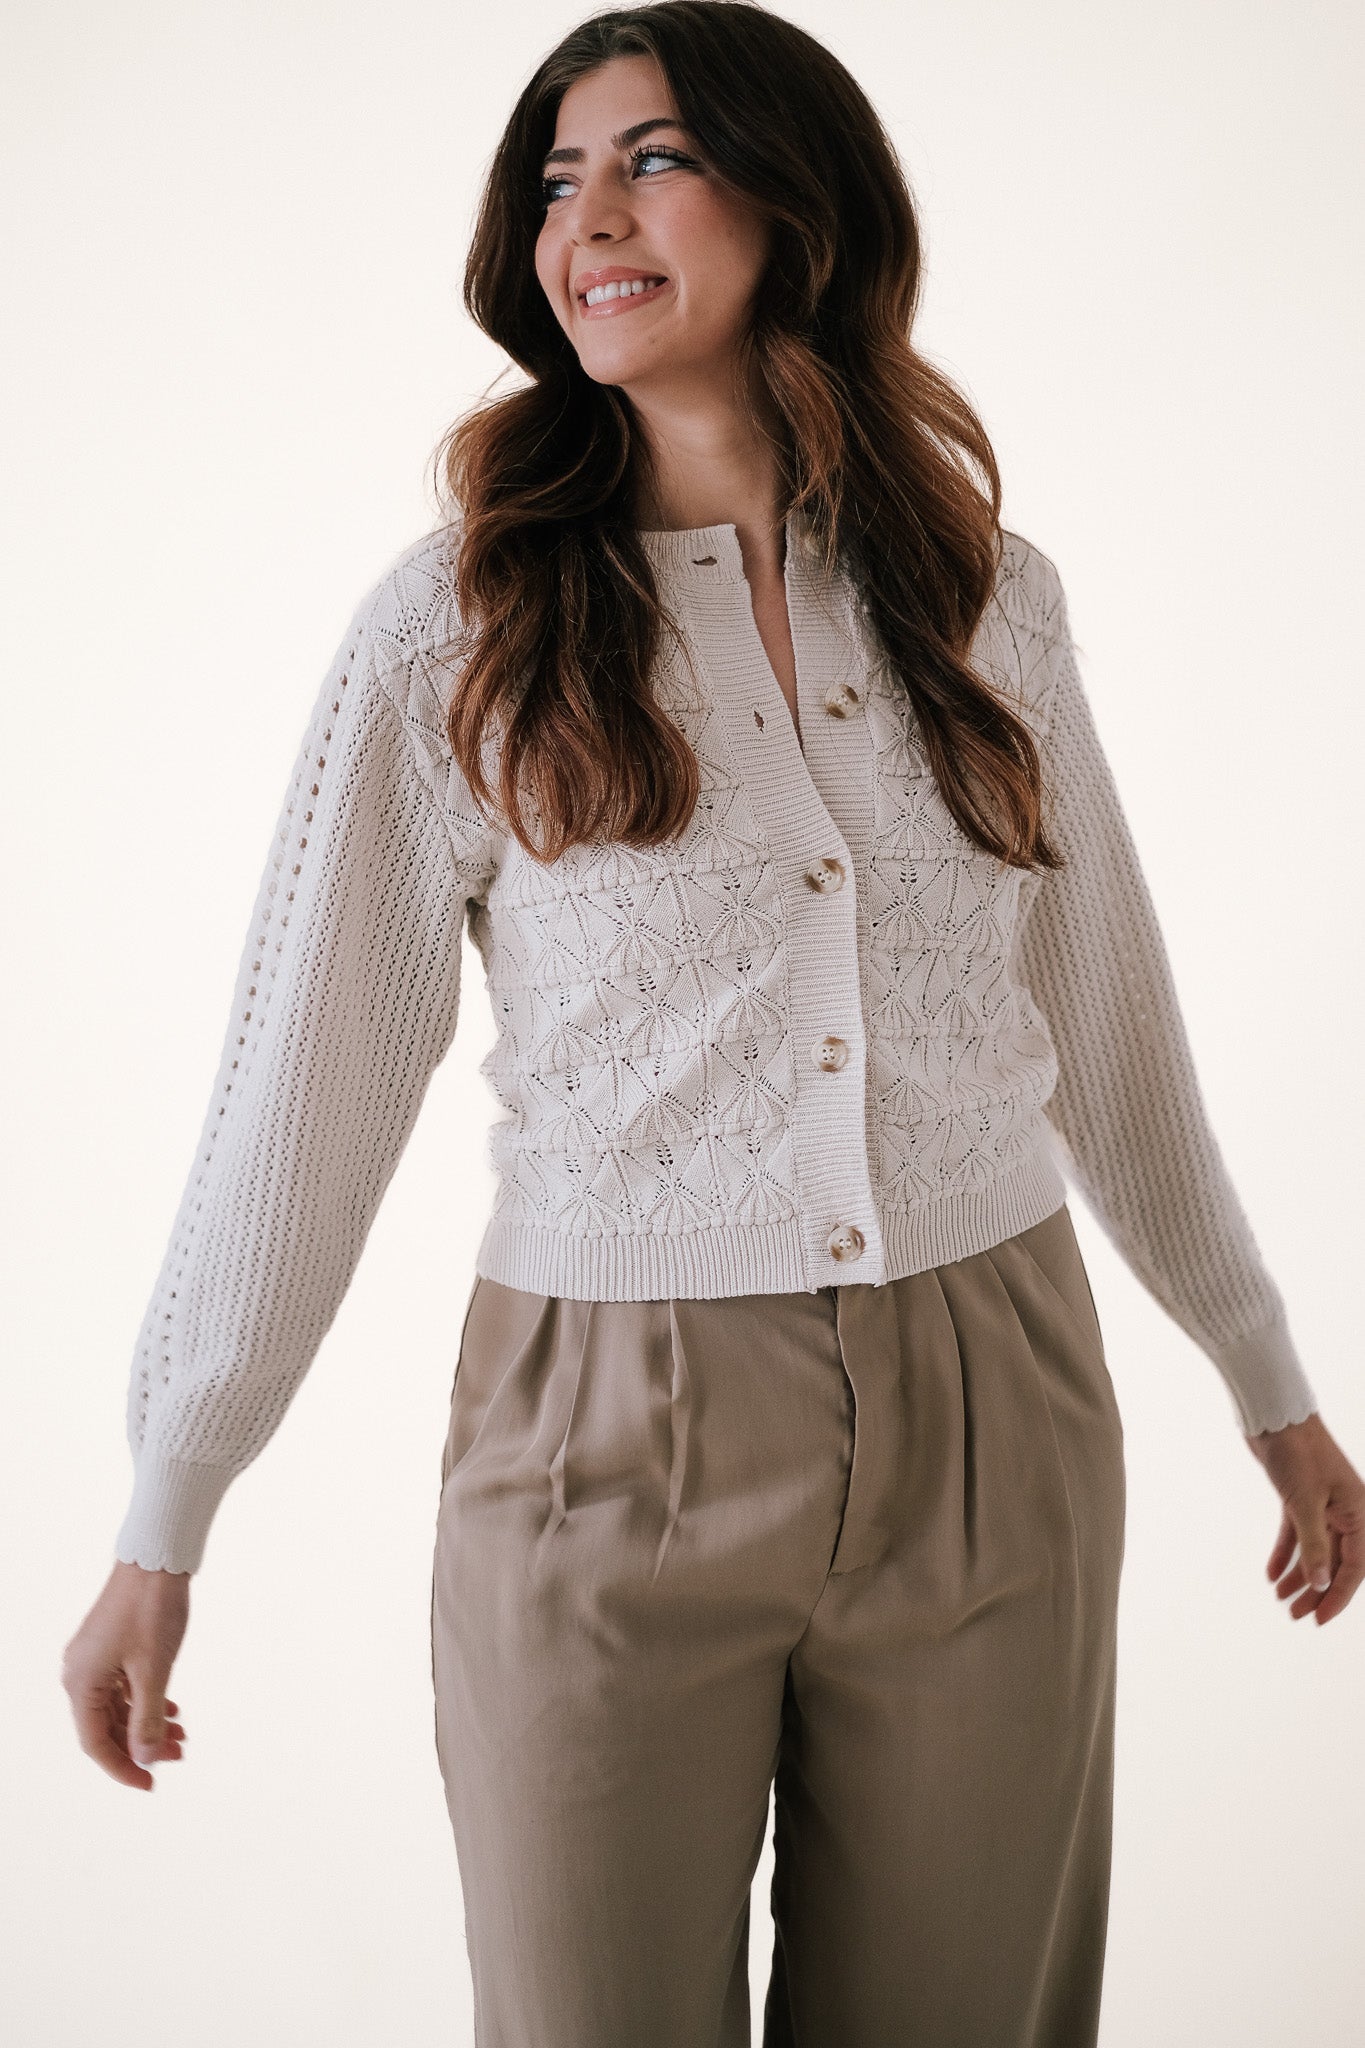 Current Air Winifred Natural Crochet Sweater Cardigan